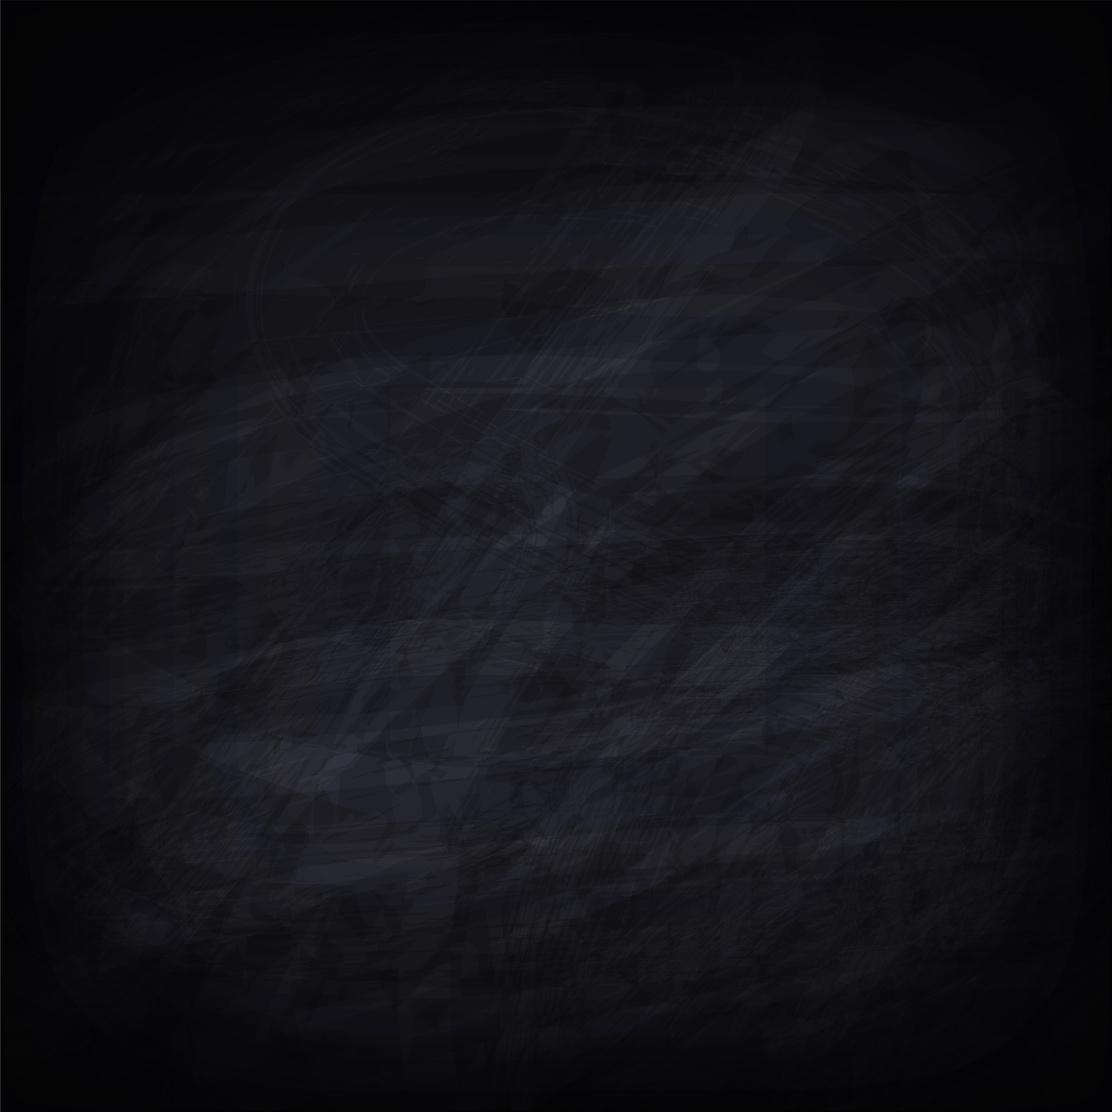 Abstract Background with Chalk Board Texture.